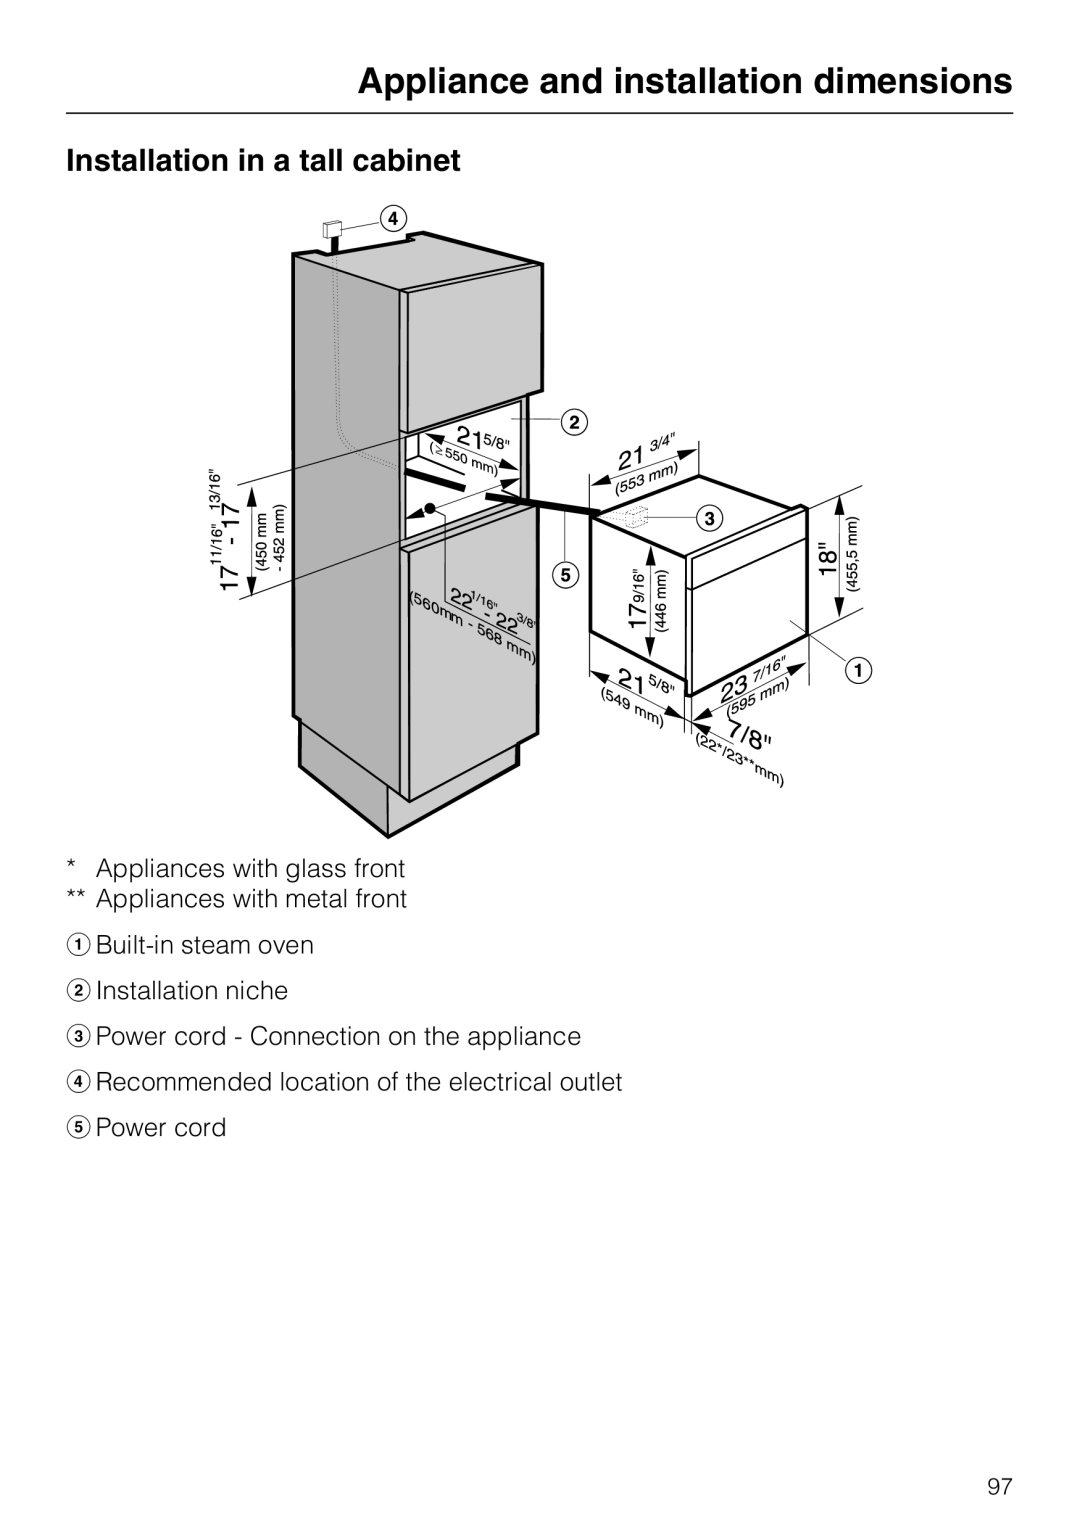 Miele 09 800 830 installation instructions Appliance and installation dimensions, Installation in a tall cabinet 